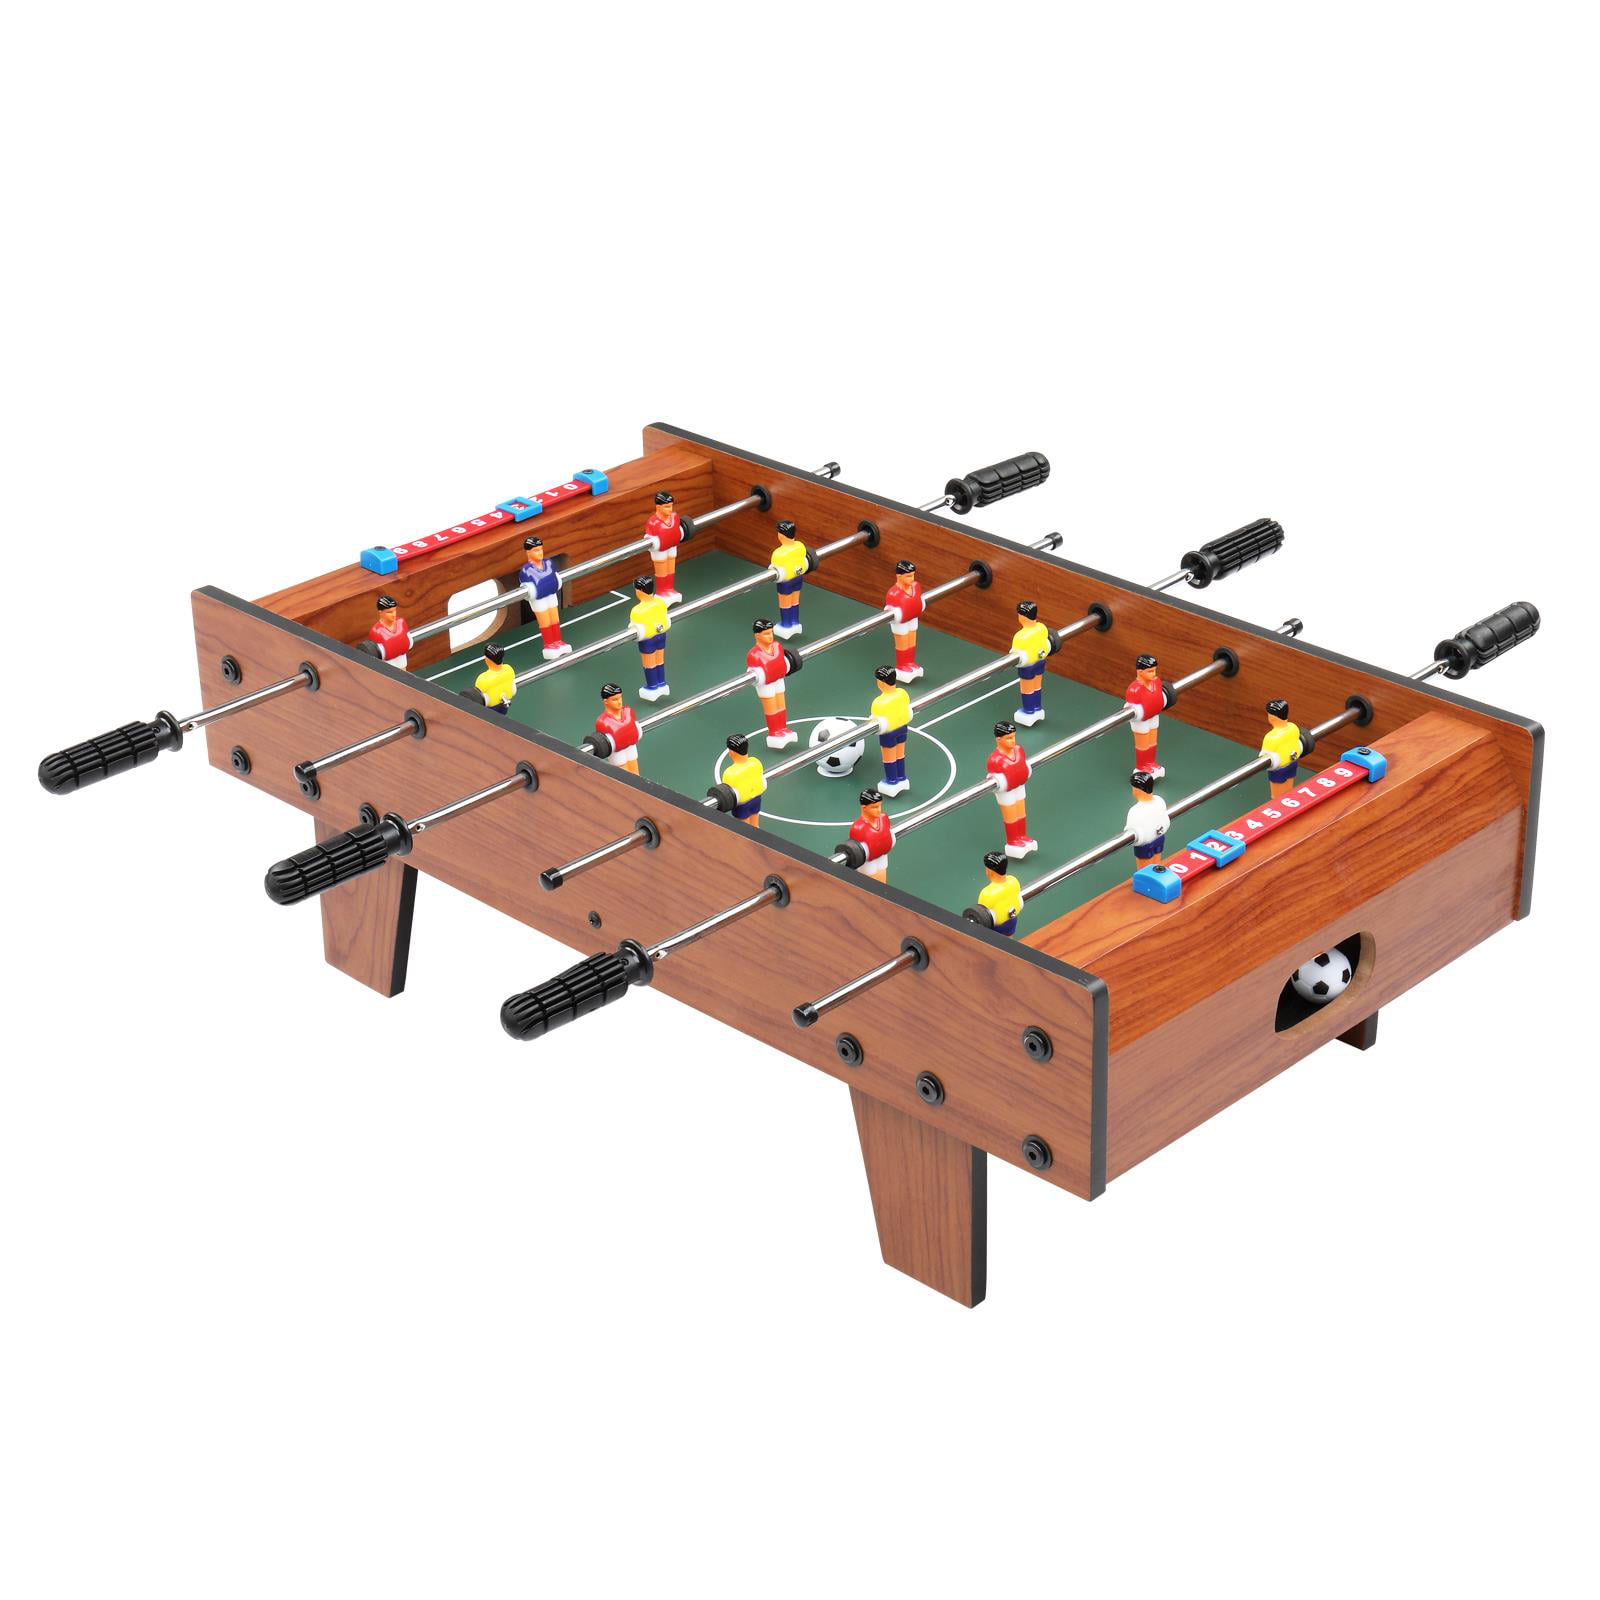 Zimtown 27" Mini Sized Wooden foostabll Table for Indoor, Outdoor Soccer Game